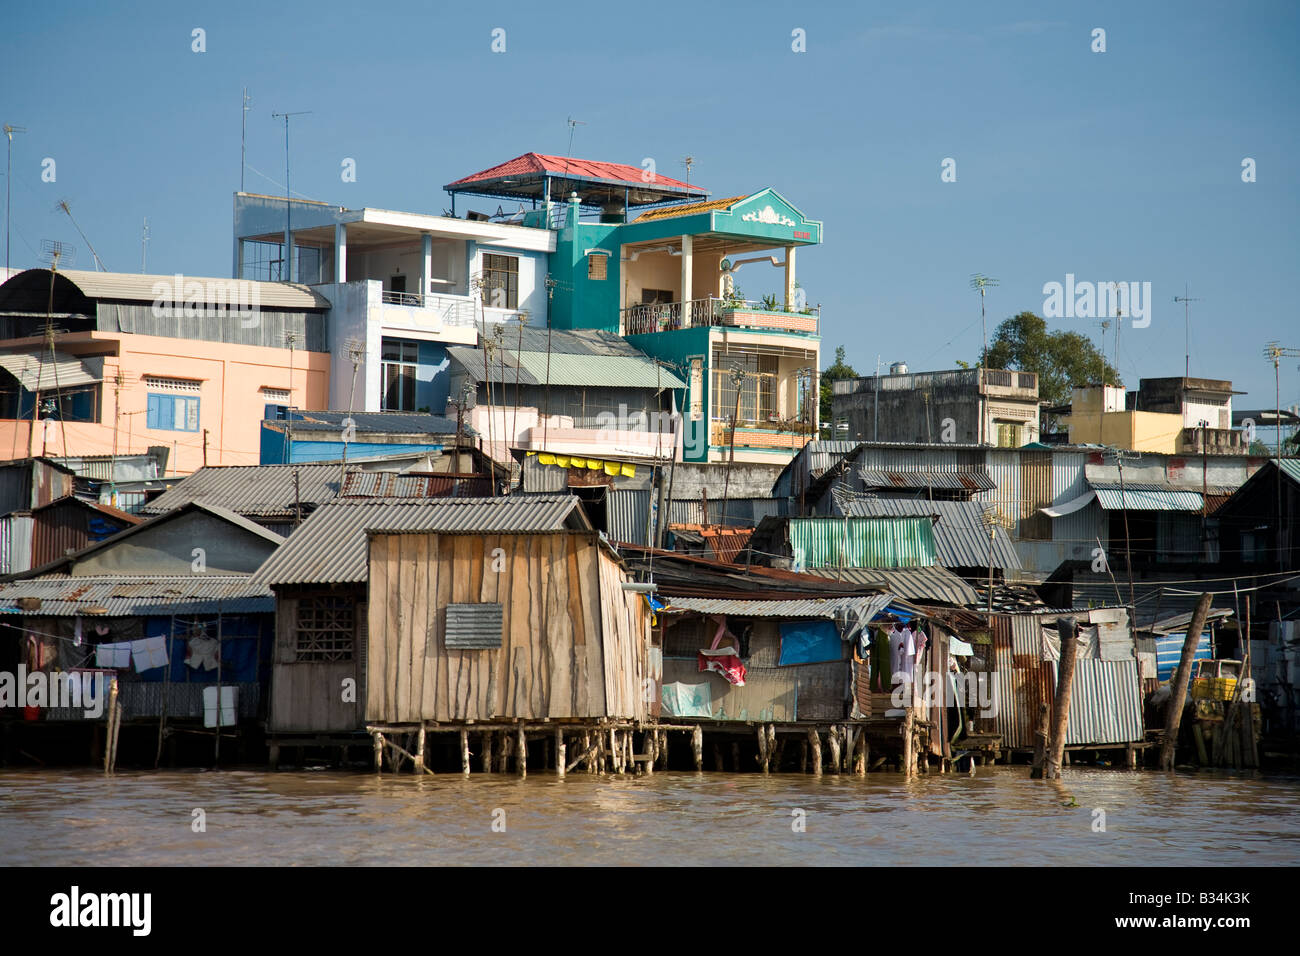 A typical housing area along one of the many rivers on the Mekong Delta, Vietnam Stock Photo